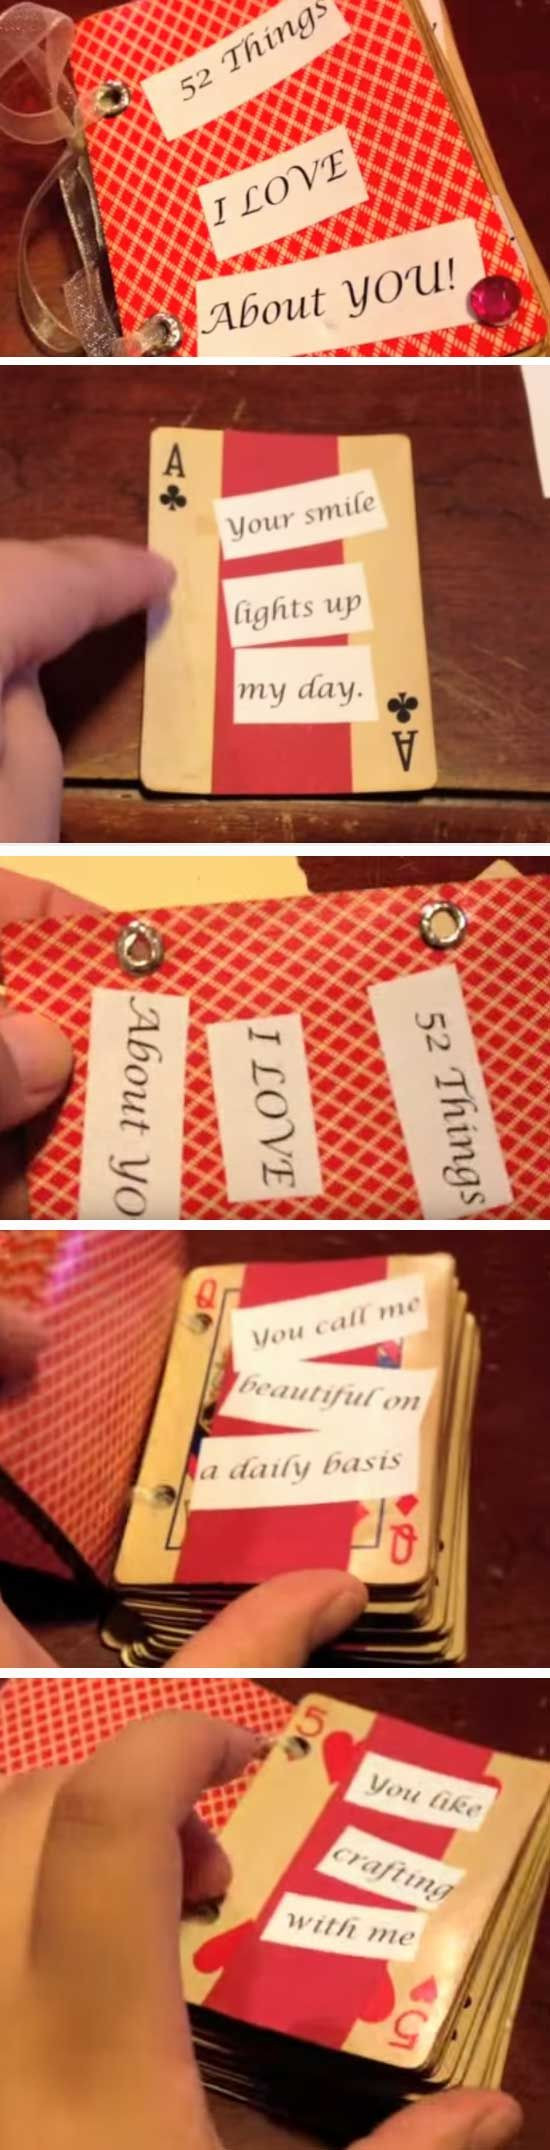 Inexpensive Gift Ideas For Boyfriend
 Best 25 Inexpensive christmas presents ideas on Pinterest